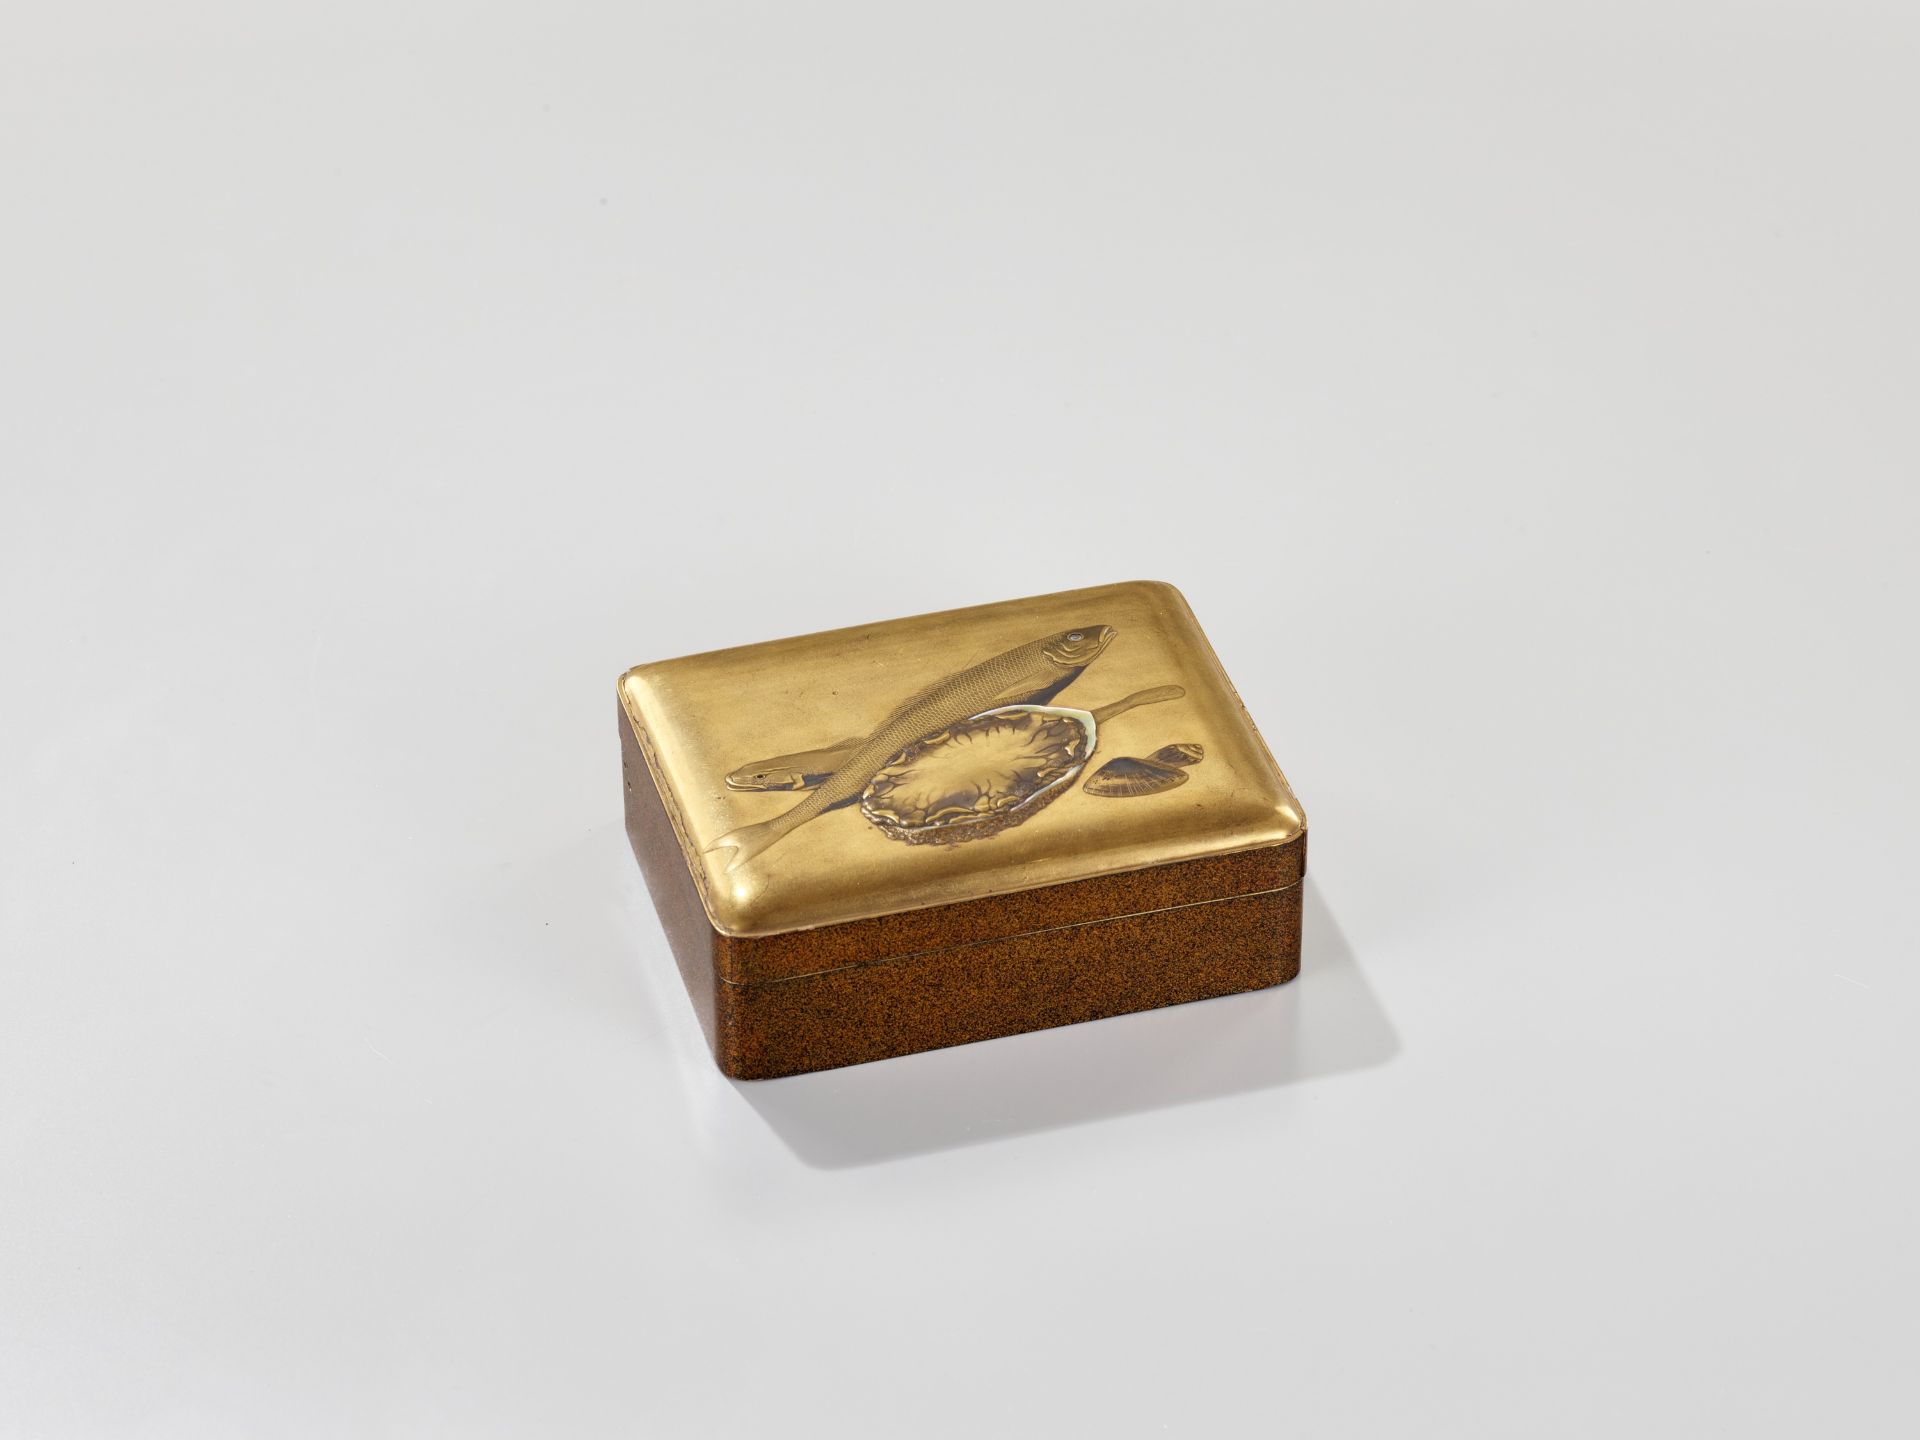 A GOLD LACQUER BOX AND COVER AND FOUR KOGO (INCENSE CONTAINERS) FOR THE INCENSE MATCHING GAME - Image 4 of 11